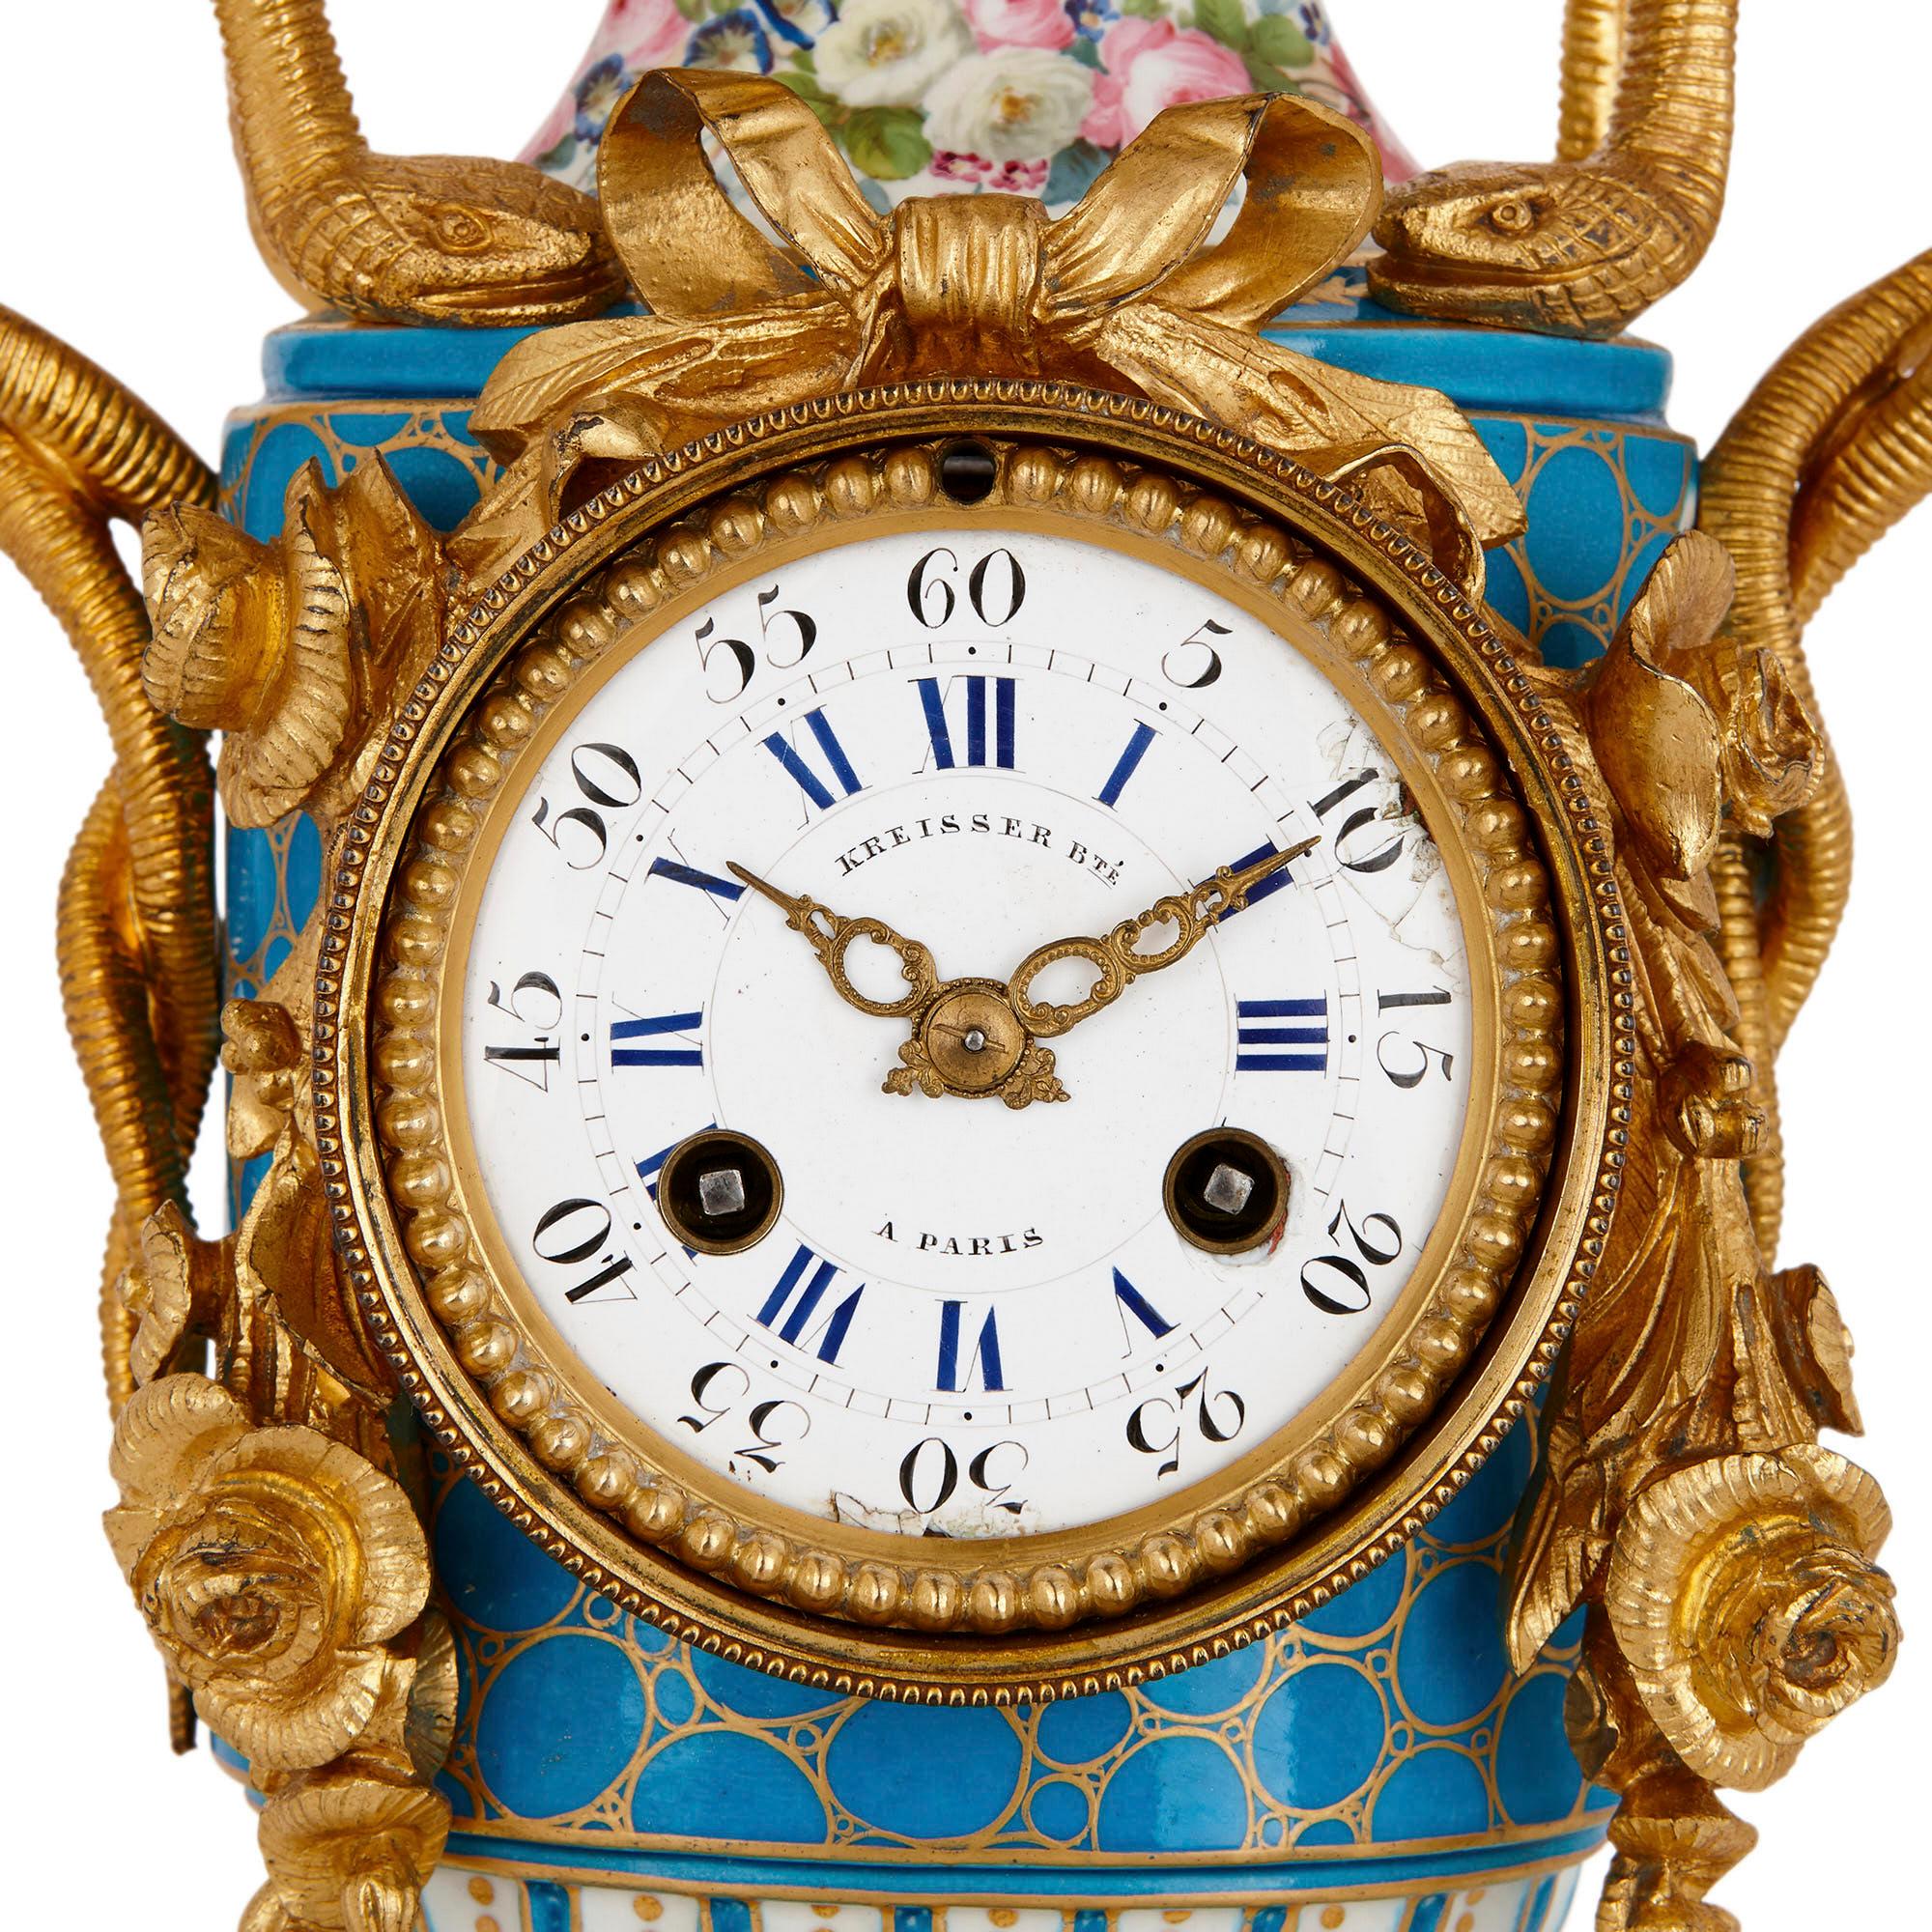 This gilt bronze mounted mantel clock is formed about a beautiful sky-blue, parcel gilt Sèvres style porcelain vase. The enamel dial is mounted within a gilt bronze drum that is draped with gilt bronze garlands and bows. The dial is enumerated with